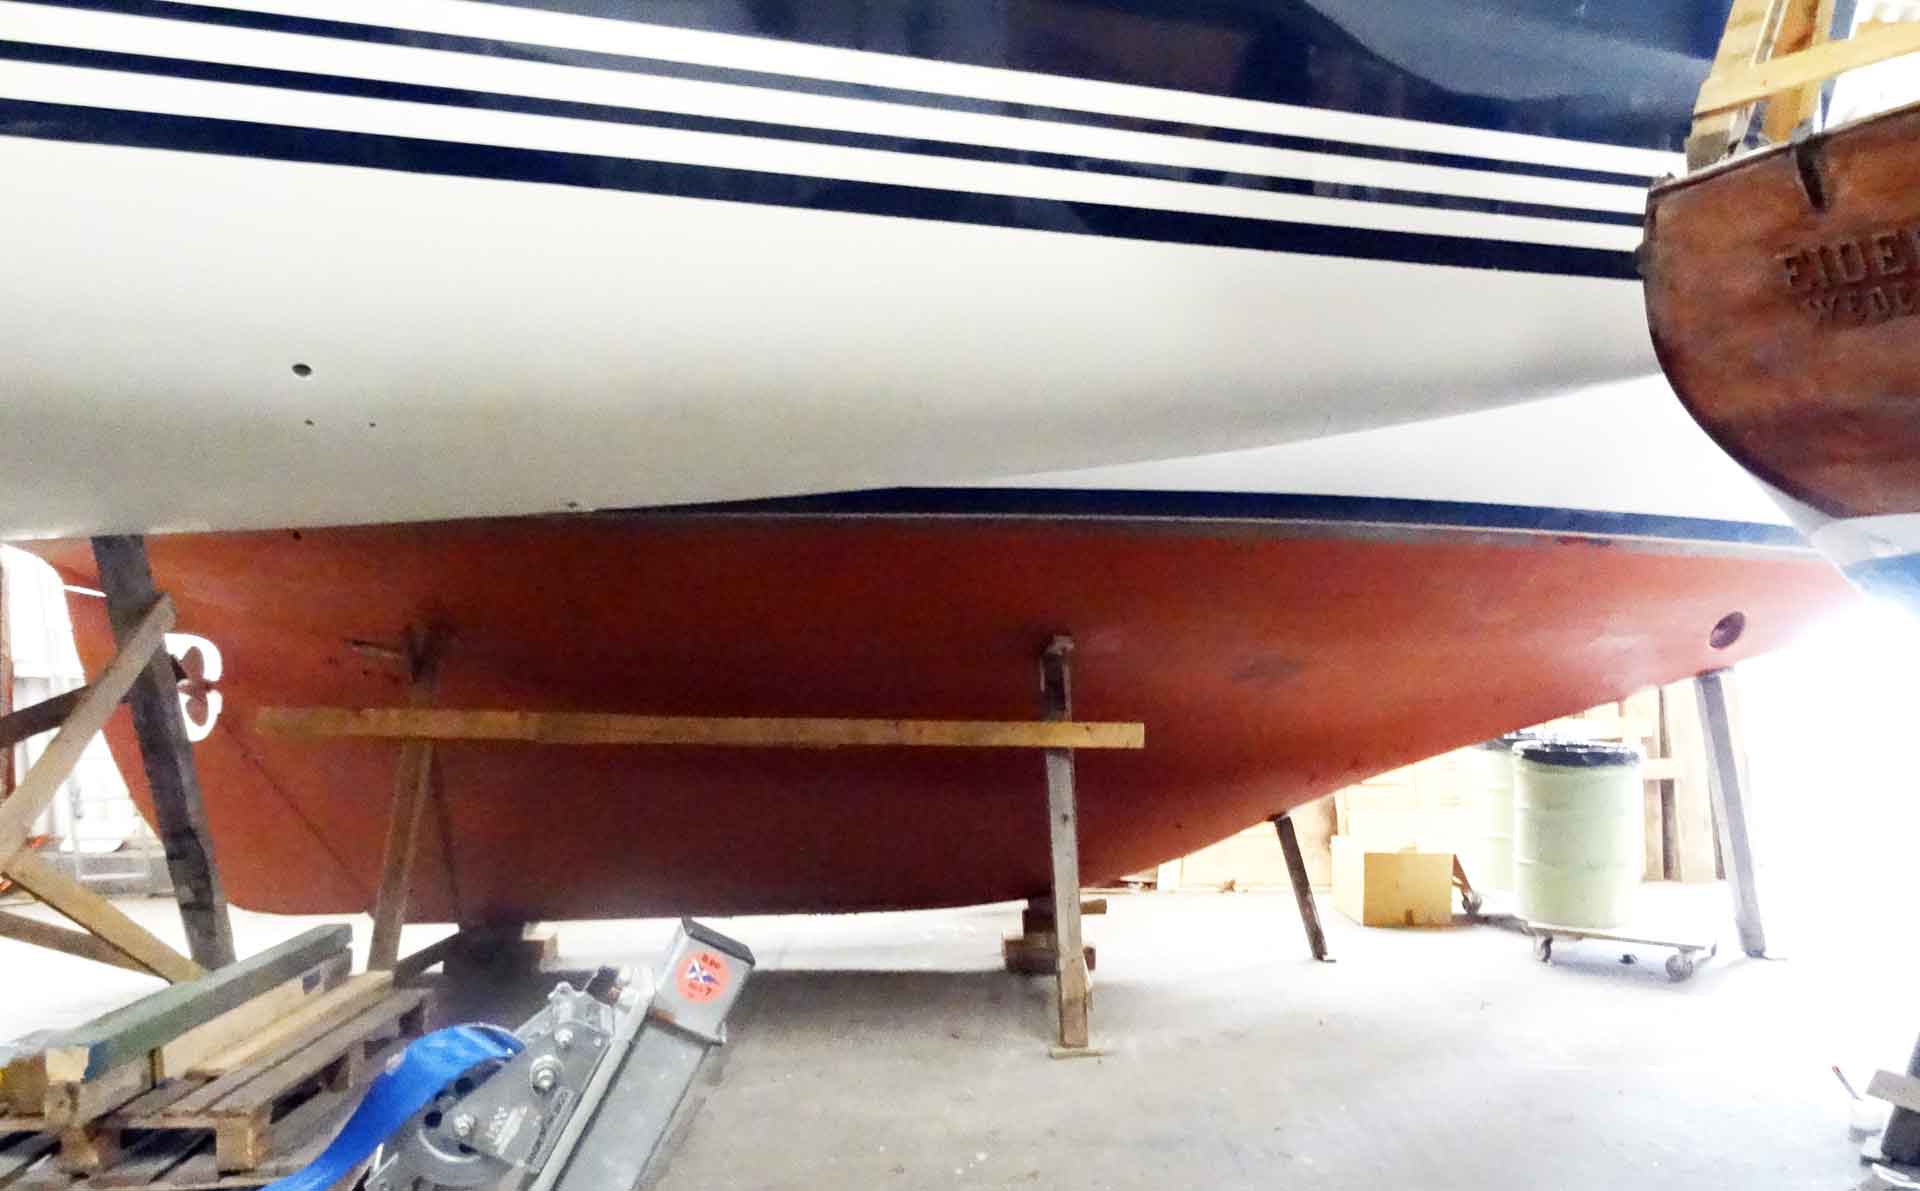 Beamy, heavy Displacement with a Full Keel - A traditional Yacht Design with a lot of Form Stability